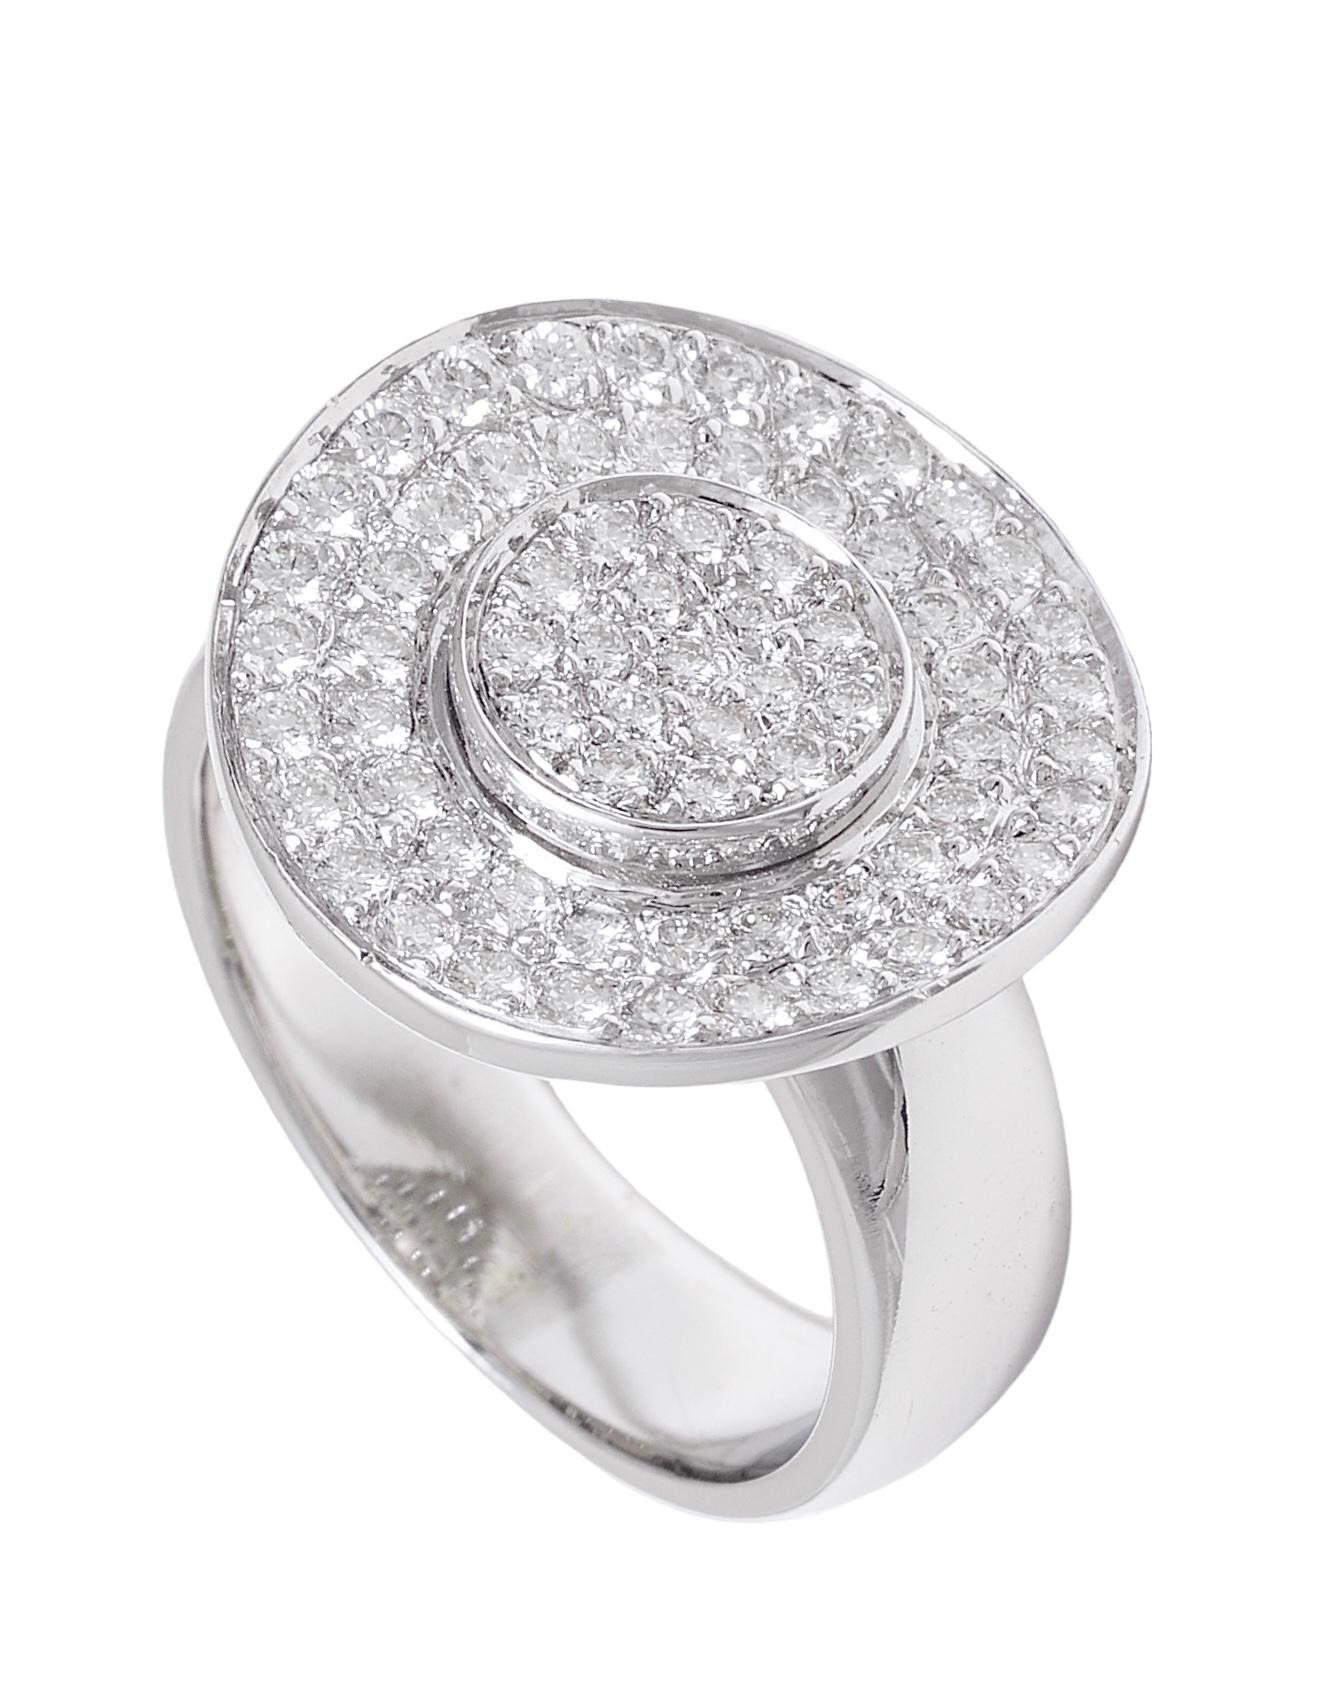 Brilliant Cut 18 kt. White Gold Ring With 1.44 ct. Diamonds For Sale